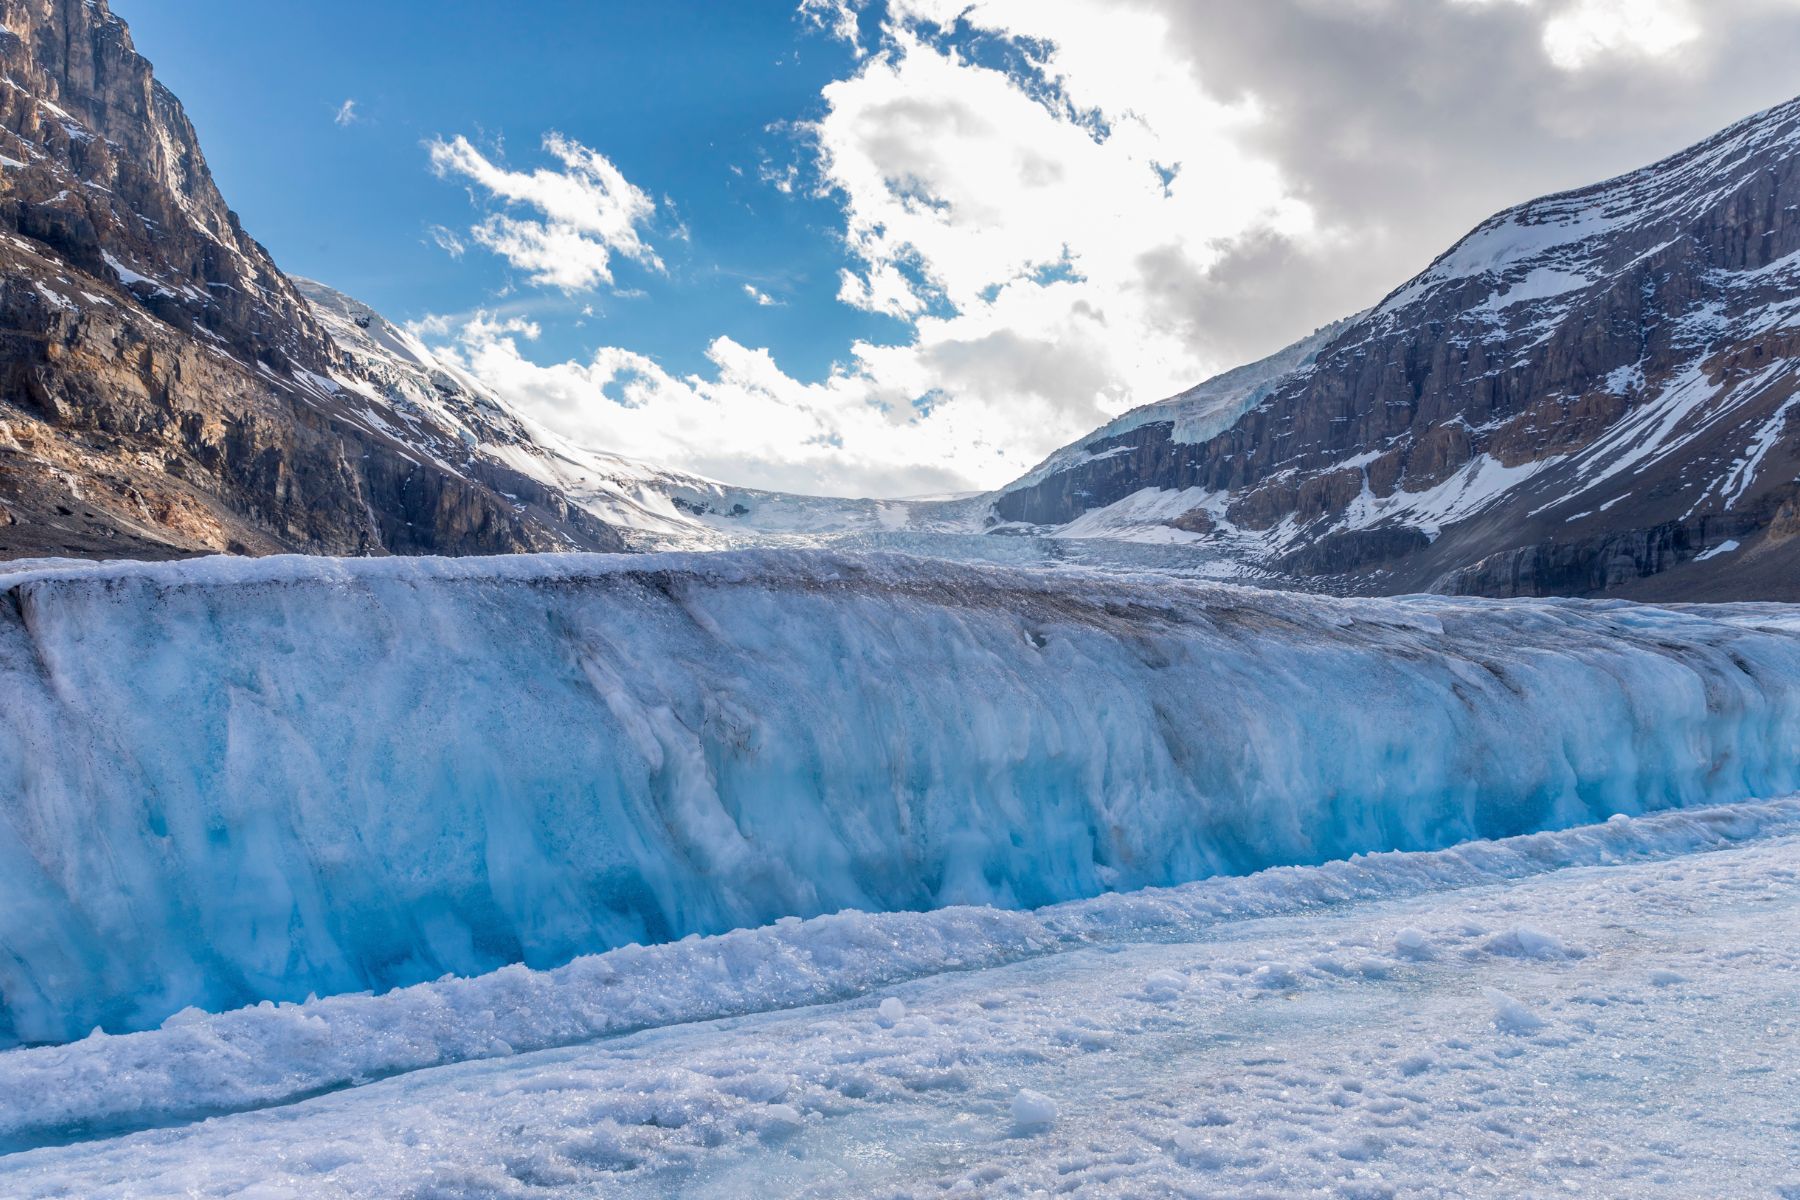 Columbia Icefield and Athabasca Glacier